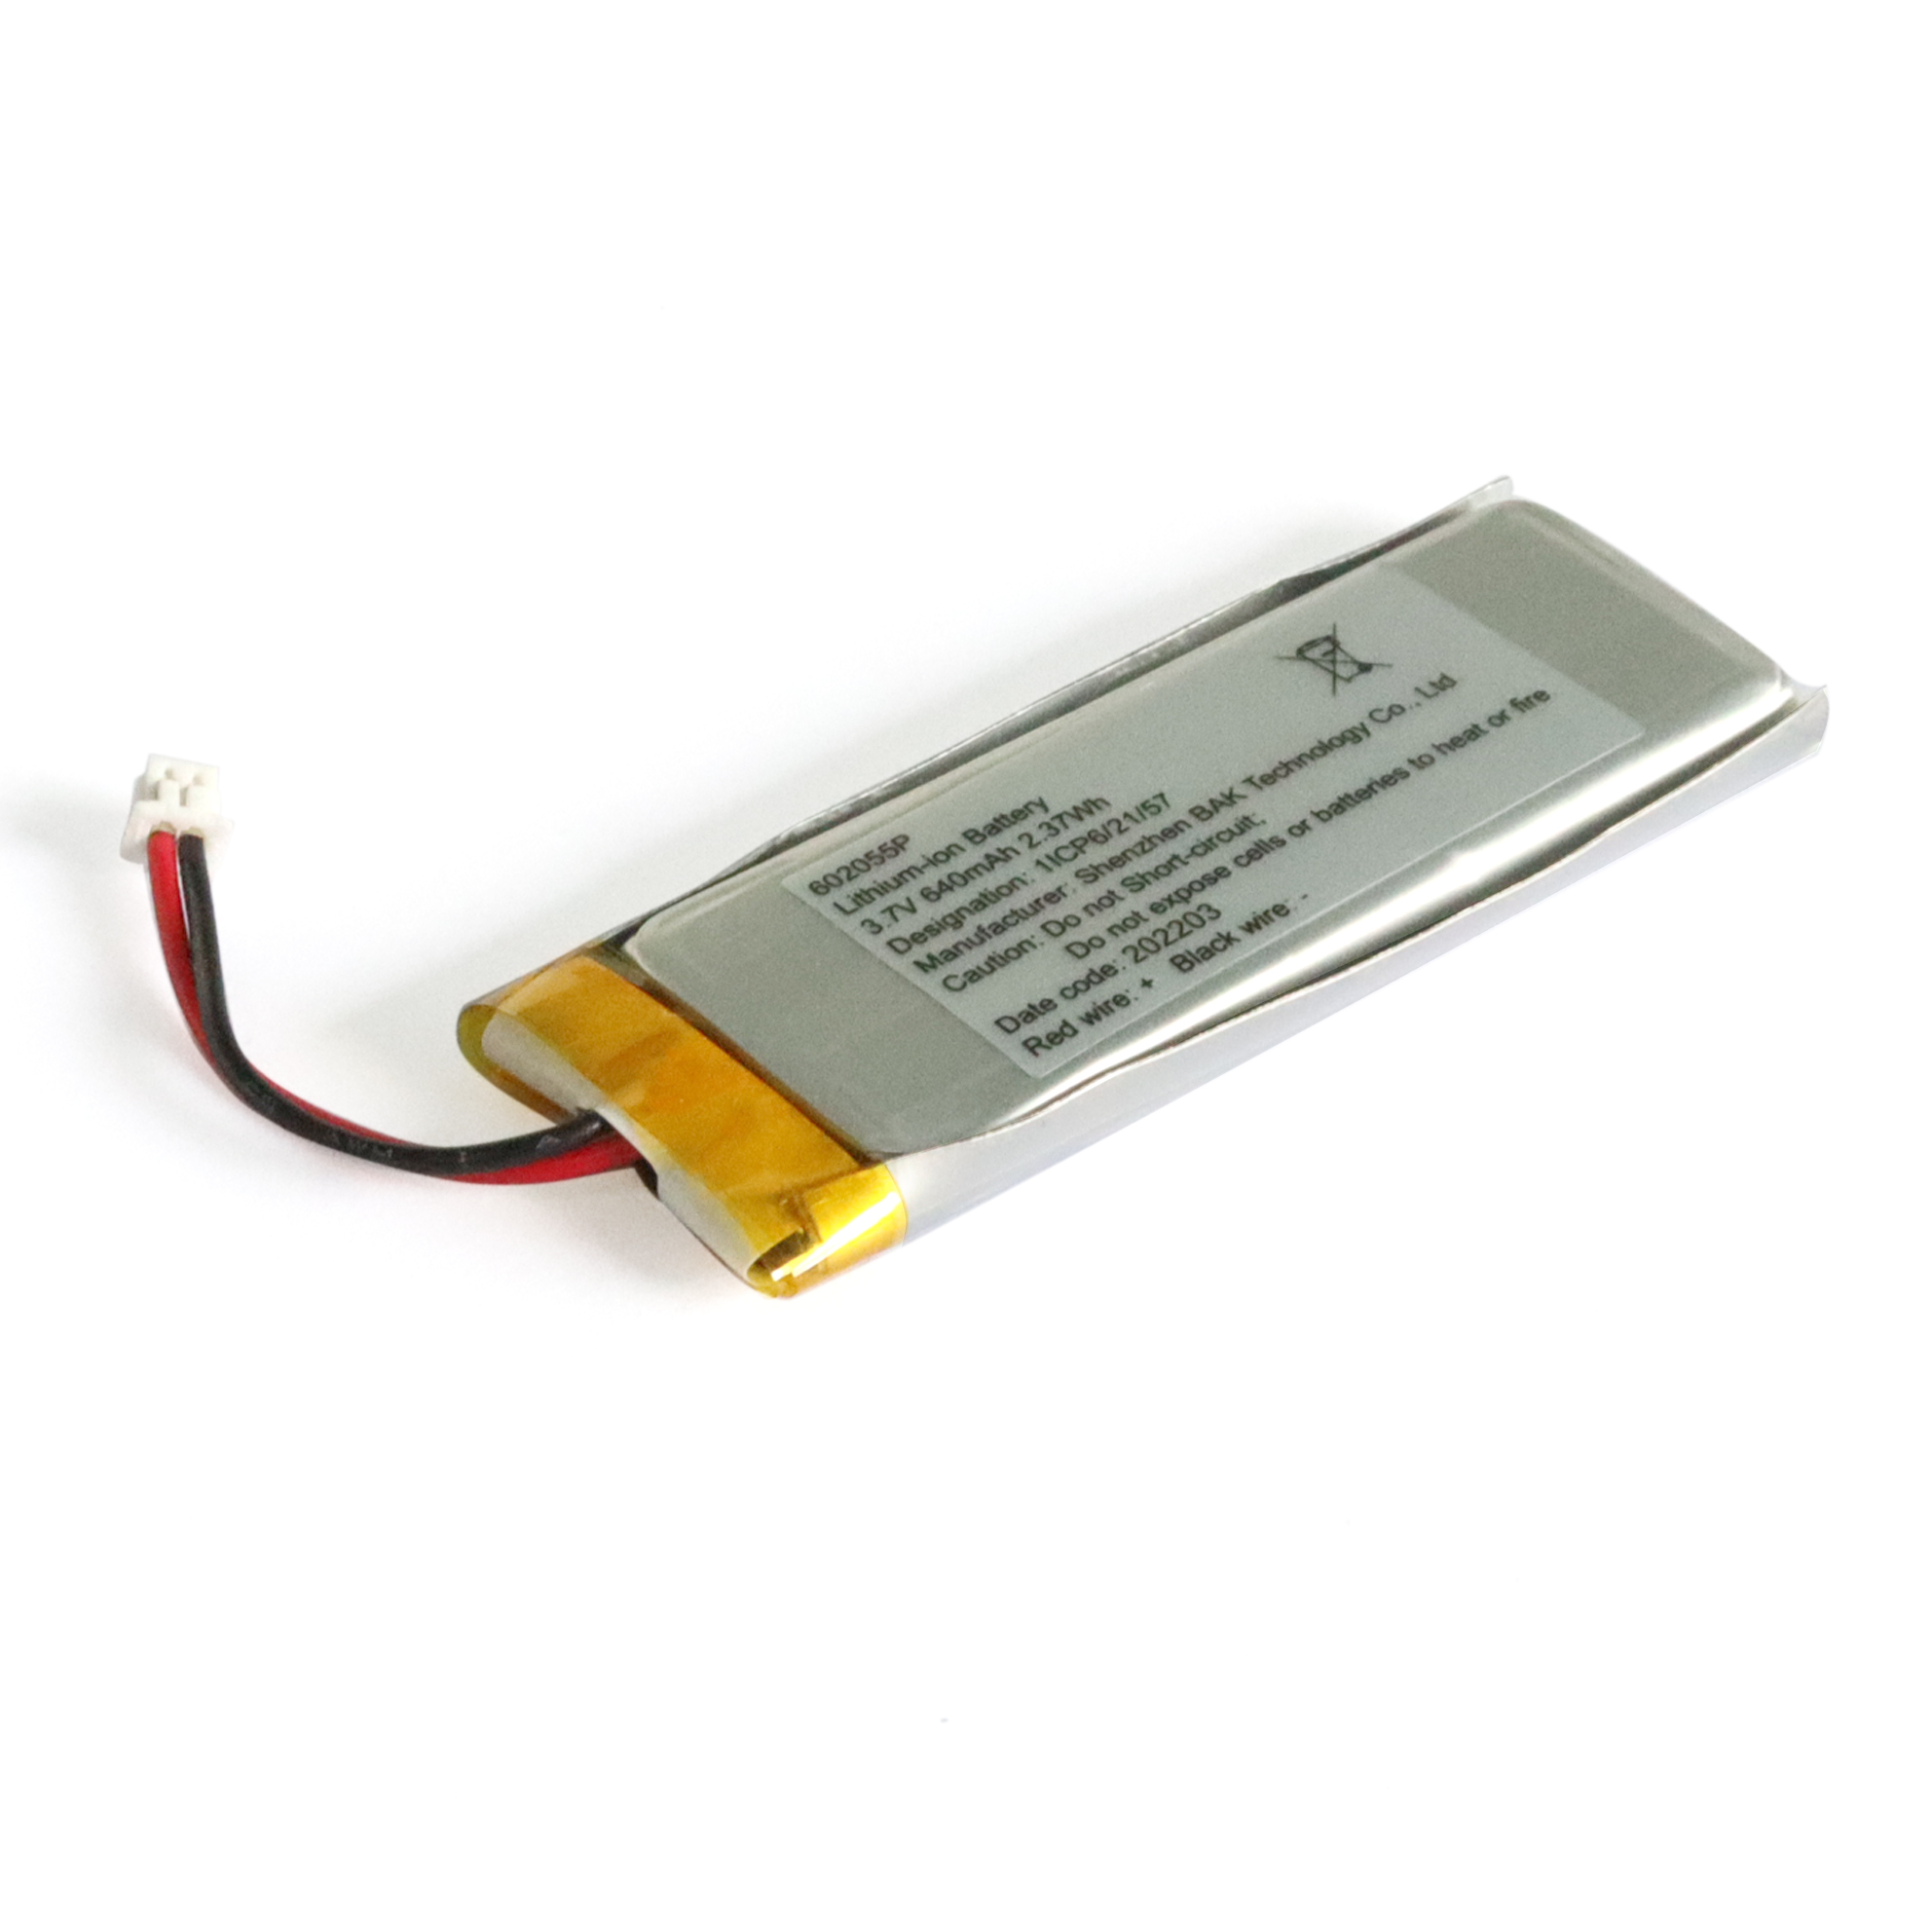 Lithium Polymer Battery 3.7V 640mAh for Bluetooth Device 